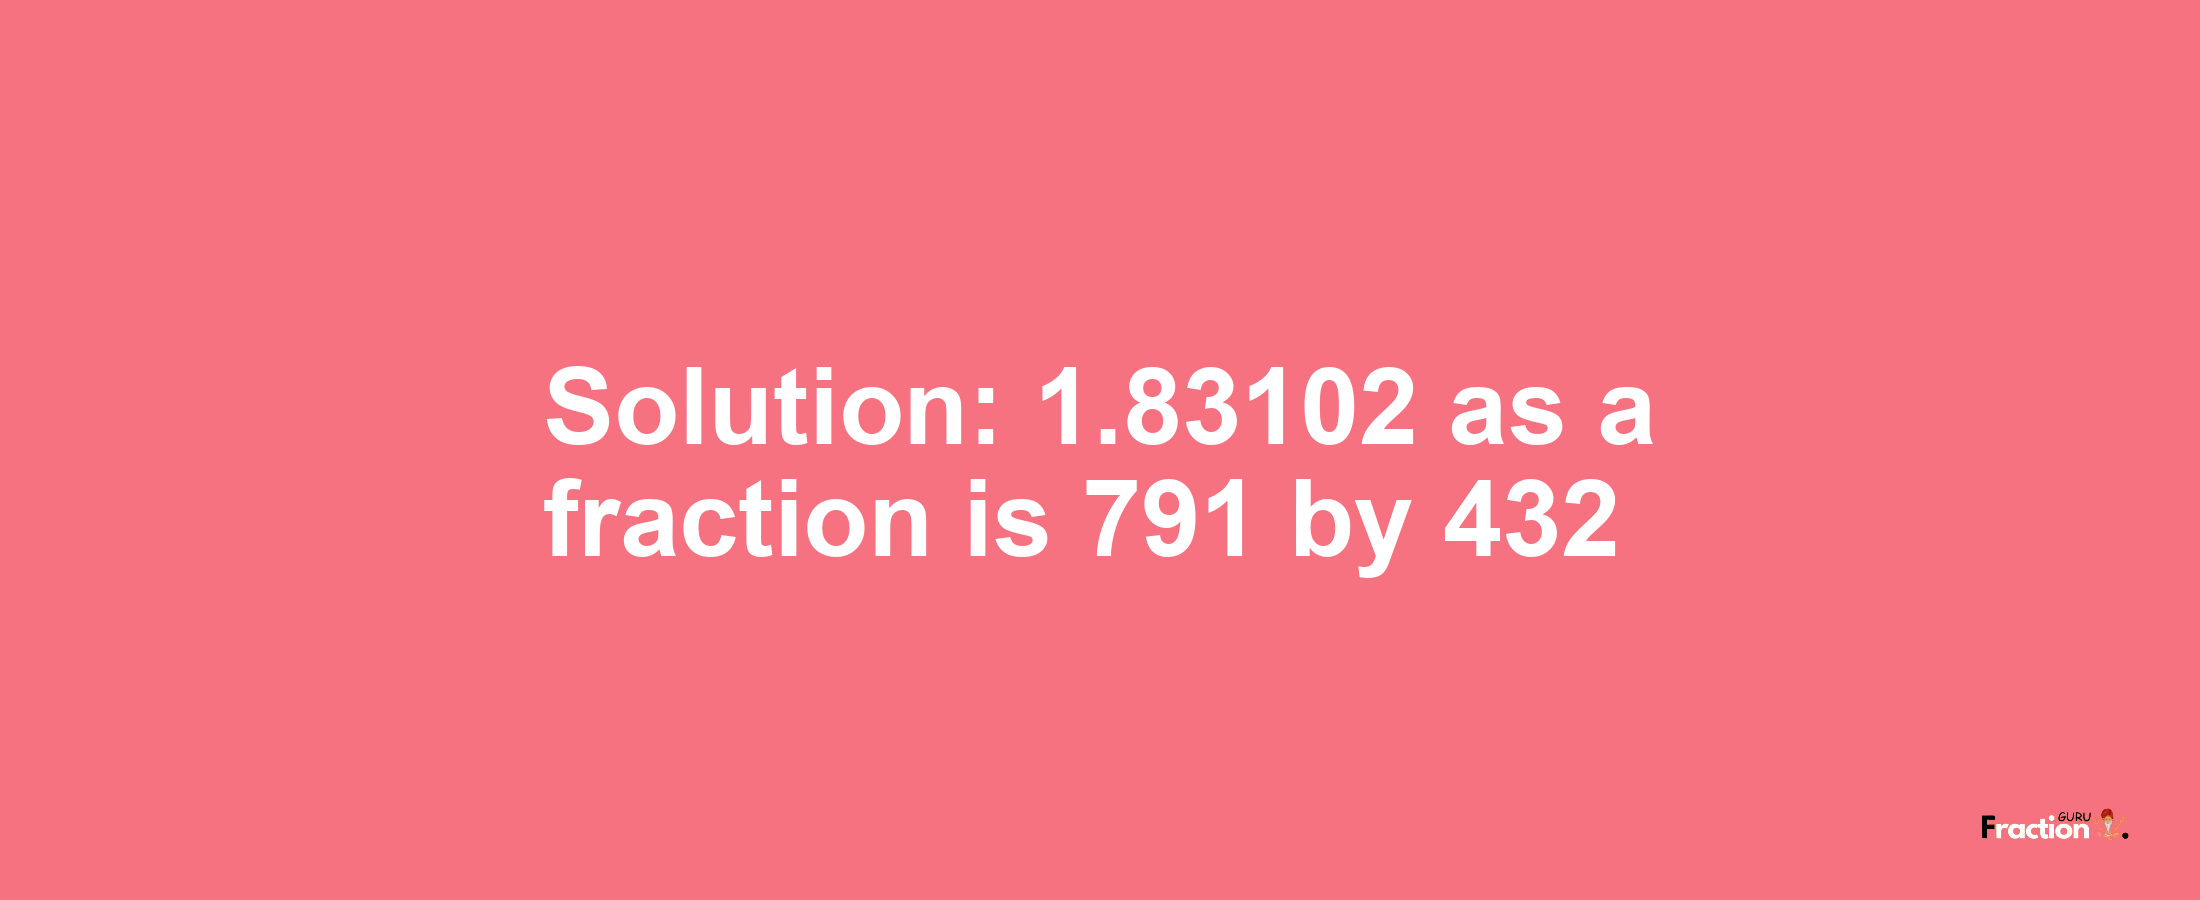 Solution:1.83102 as a fraction is 791/432